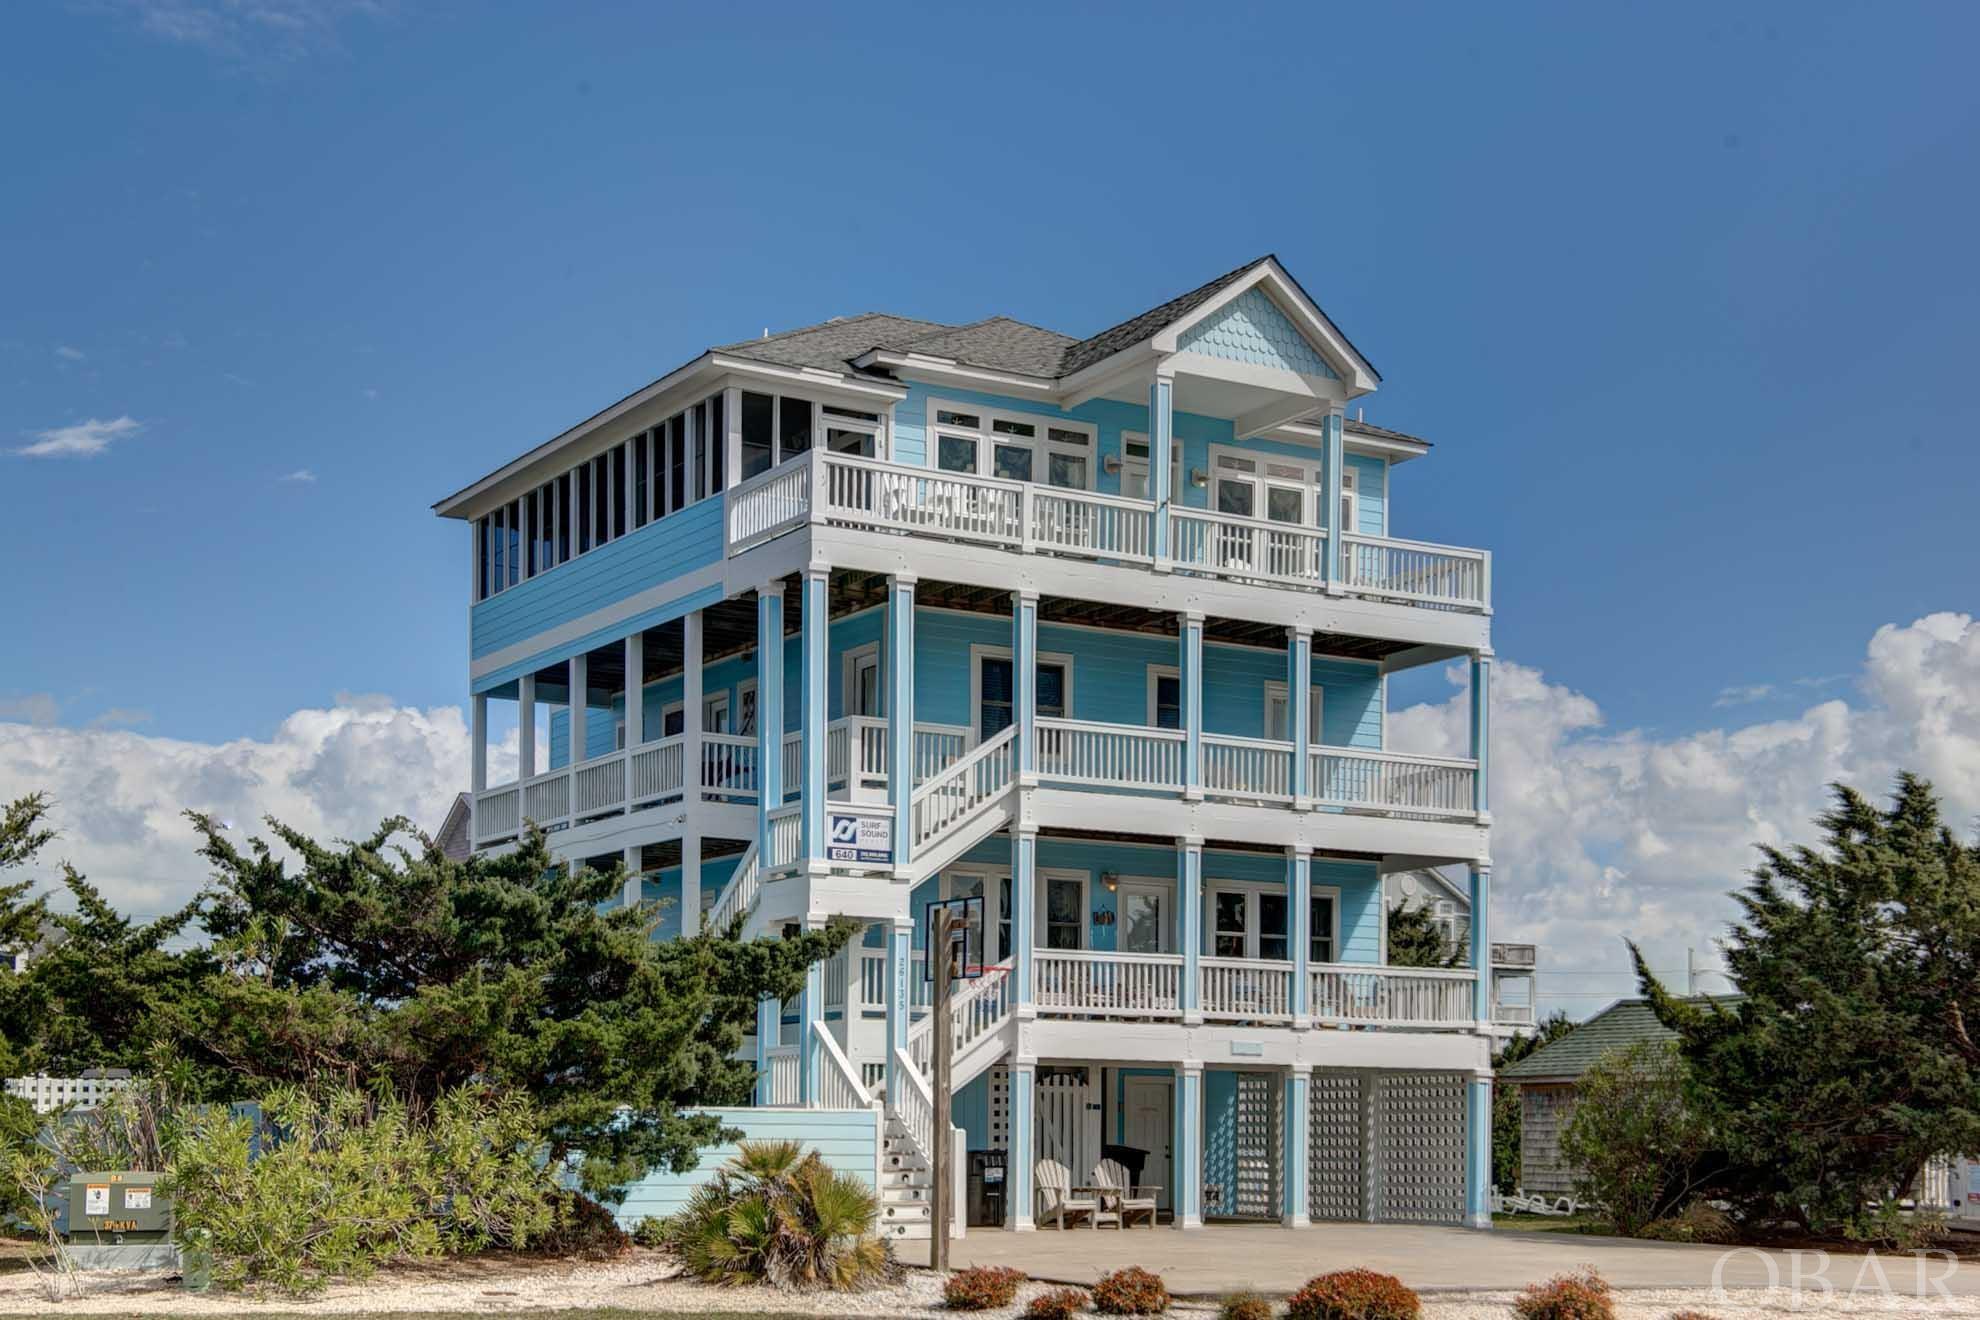 Your search for the home-that-has-it-all is complete!  "Frolic Inn" is the ultimate vacation/investment home sporting a beautiful & delightful beach decor - and comes "equipped" with gorgeous sound and marsh views, sunsets, and stunning dark sky views. Frolic Inn's upper level offers a grand Pamlico Sound vista; comfortable and tasteful furnishings; a lovely cook's kitchen with two dishwashers and two stoves; dining for fourteen; a huge sun deck; a nicely furnished screened porch; and elevator access to each floor and the ground level.  The master on this level has deck/screened porch access and compartmented bath and vanity areas. Welcoming, "themed" bedrooms on the next levels add to the total beach experience; each is cheerfully painted and decorated with its own coastal motif and each offers shaded outside/deck access with sloped ramp access from each bedroom.  Outside on the ground level, you can take your pick from the large private pool; children's pool & sandbox; screened Tiki bar (cable-tv-ready) with hot tub and built-in picnic area; volleyball; horseshoes; basketball; and two ample storage areas for guest items. Unique, first-rate items abound: trex decking/landings; swiveling door curtain rods; 2x6 framing; 3 course rebar construction in elevator shaft; Adura tile and planking; built-in hair dryers in each bath; media room extra sound insulation; generator hookup; and even a cost saving solar-powered hot water heater (and extra new electric standby water heater). The owners have continued a high-quality standard for their home with numerous recent improvements: NEW FORTIFIED ROOF just completed; new range; new dishwashers; top floor HVAC; pool pump & heater; new living area sofa, loveseat, and swivel chairs; new dining room chairs; washer/dryer(s) replaced in 21 and 22; exterior paint; new hot tub motor; new pool table; new hammock; new extra hot water heater; and much more.   Neighborhood amenities include the WOW community boat ramp/dock and boardwalk AND beach access thru reciprocal agreement with oceanside Hatteras Colony s/d. Nearby attractions are the TriVillage walk/bike path; local shopping and dining; NPS Salvo day use area; and 4WD beach access at the south end of the village. Come see all this lovely home and great location have to offer!